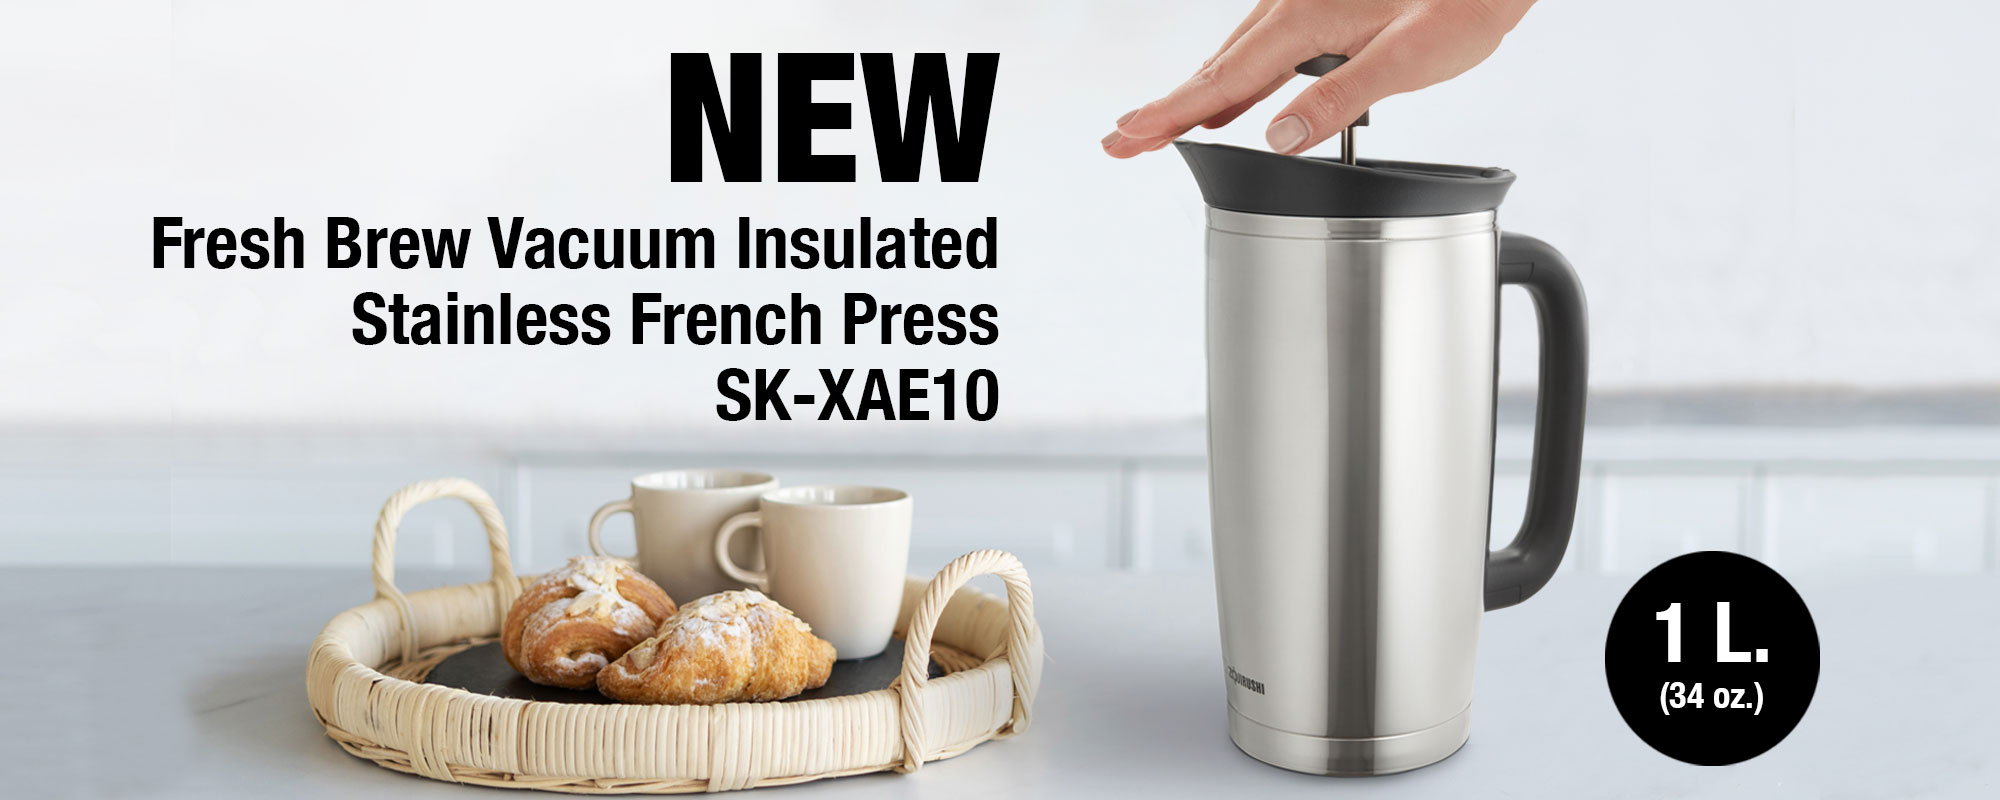 NEW Fresh Brew Vacuum Insulated Stainless French Press SK-XAE10